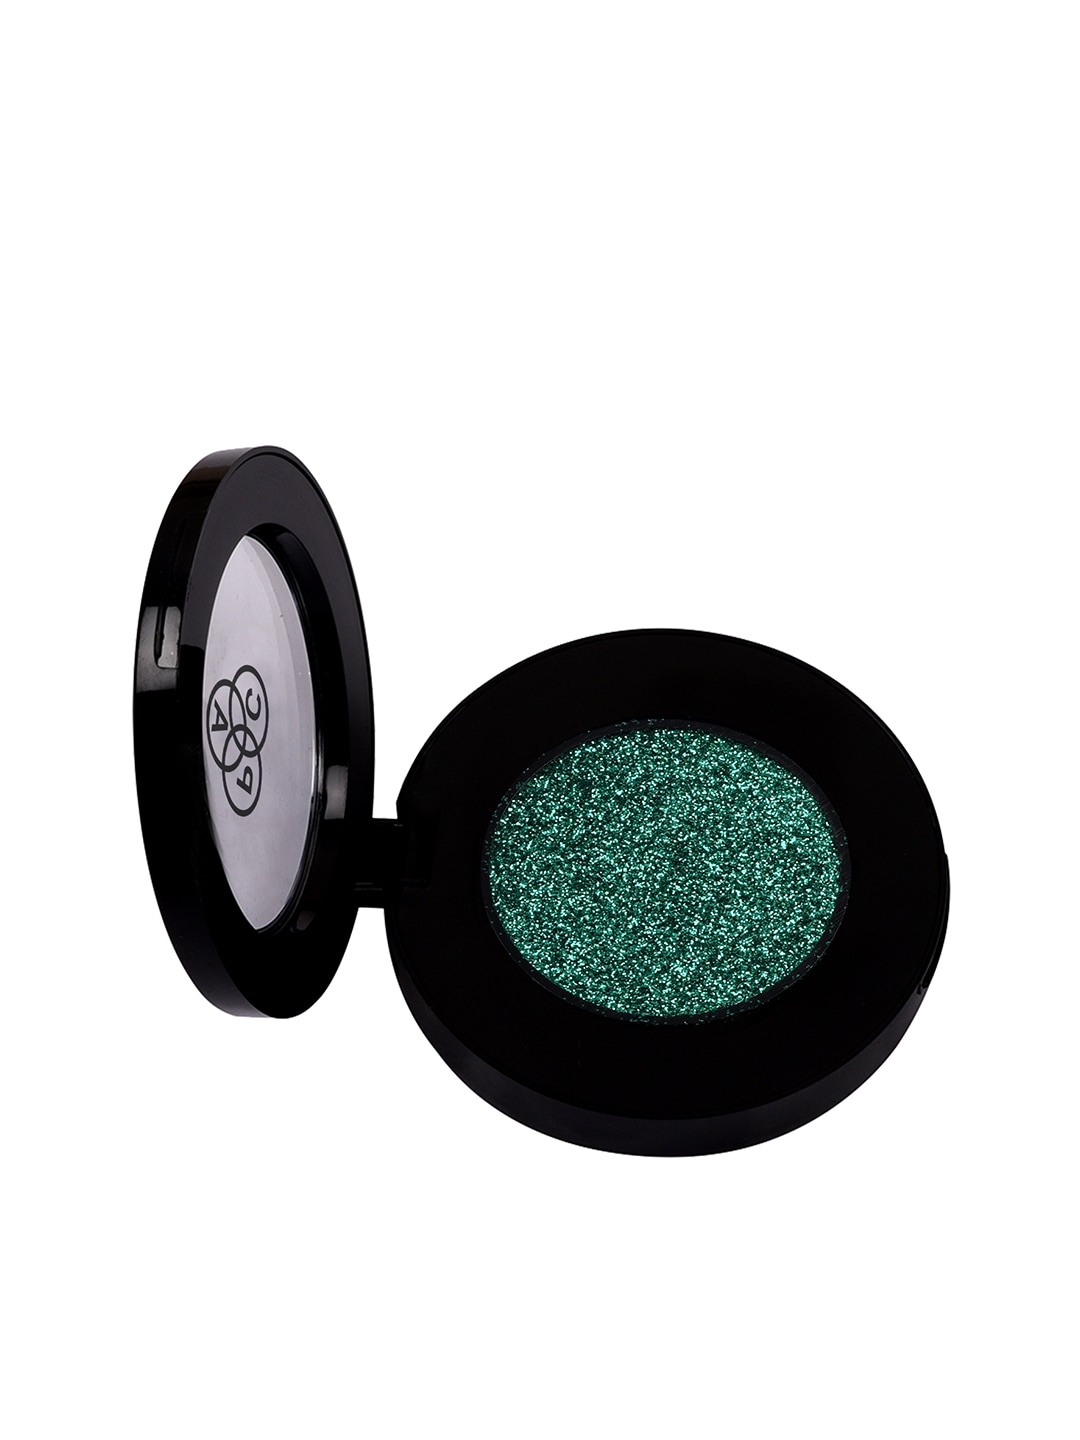 PAC 27 Fashion Police Pressed Glitter Eyeshadow 3 g Price in India